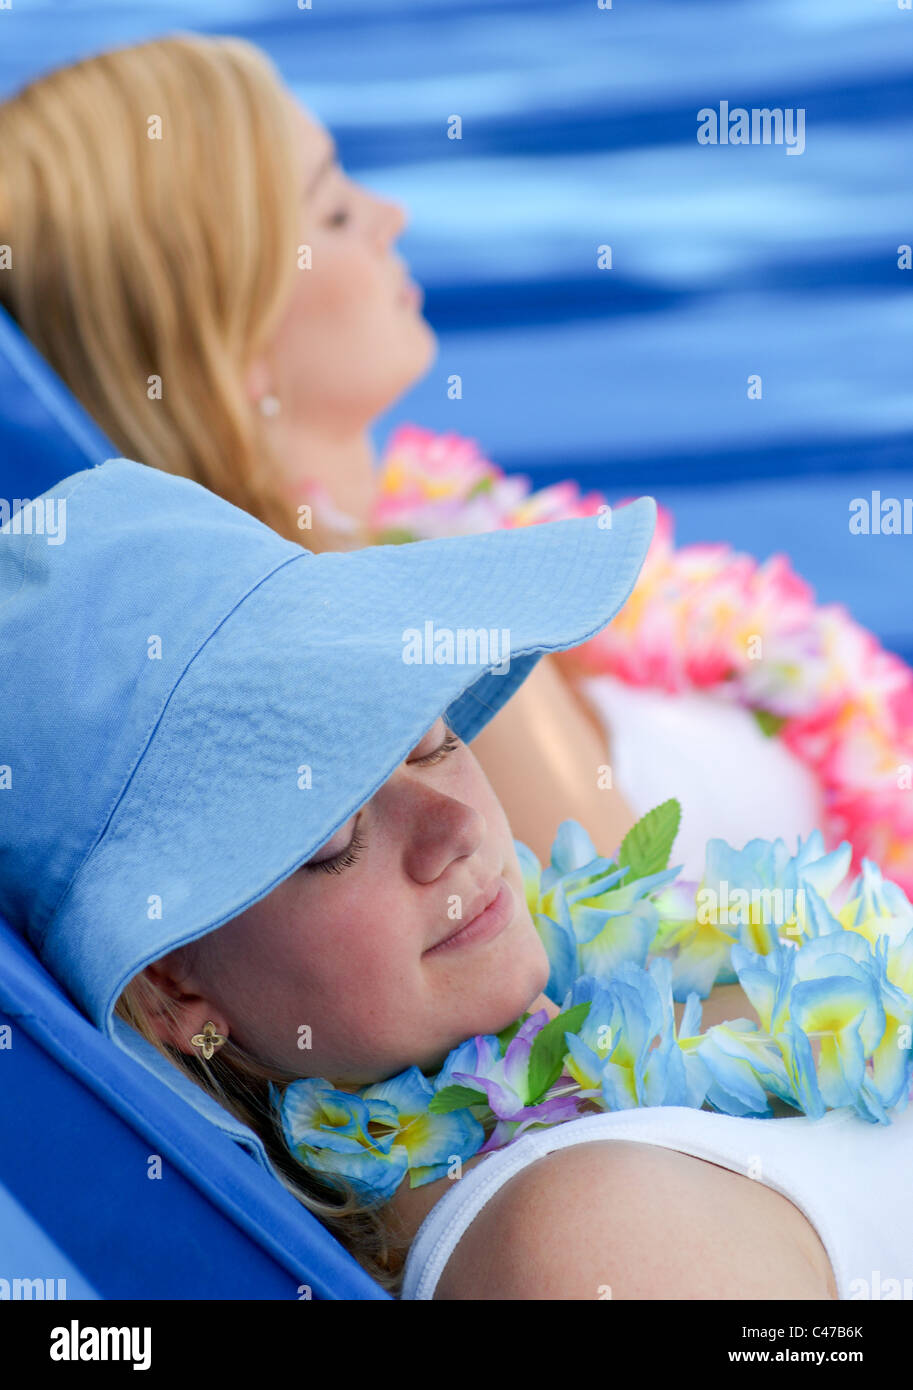 Tow beautiful young women on vacation resting and relaxing Stock Photo